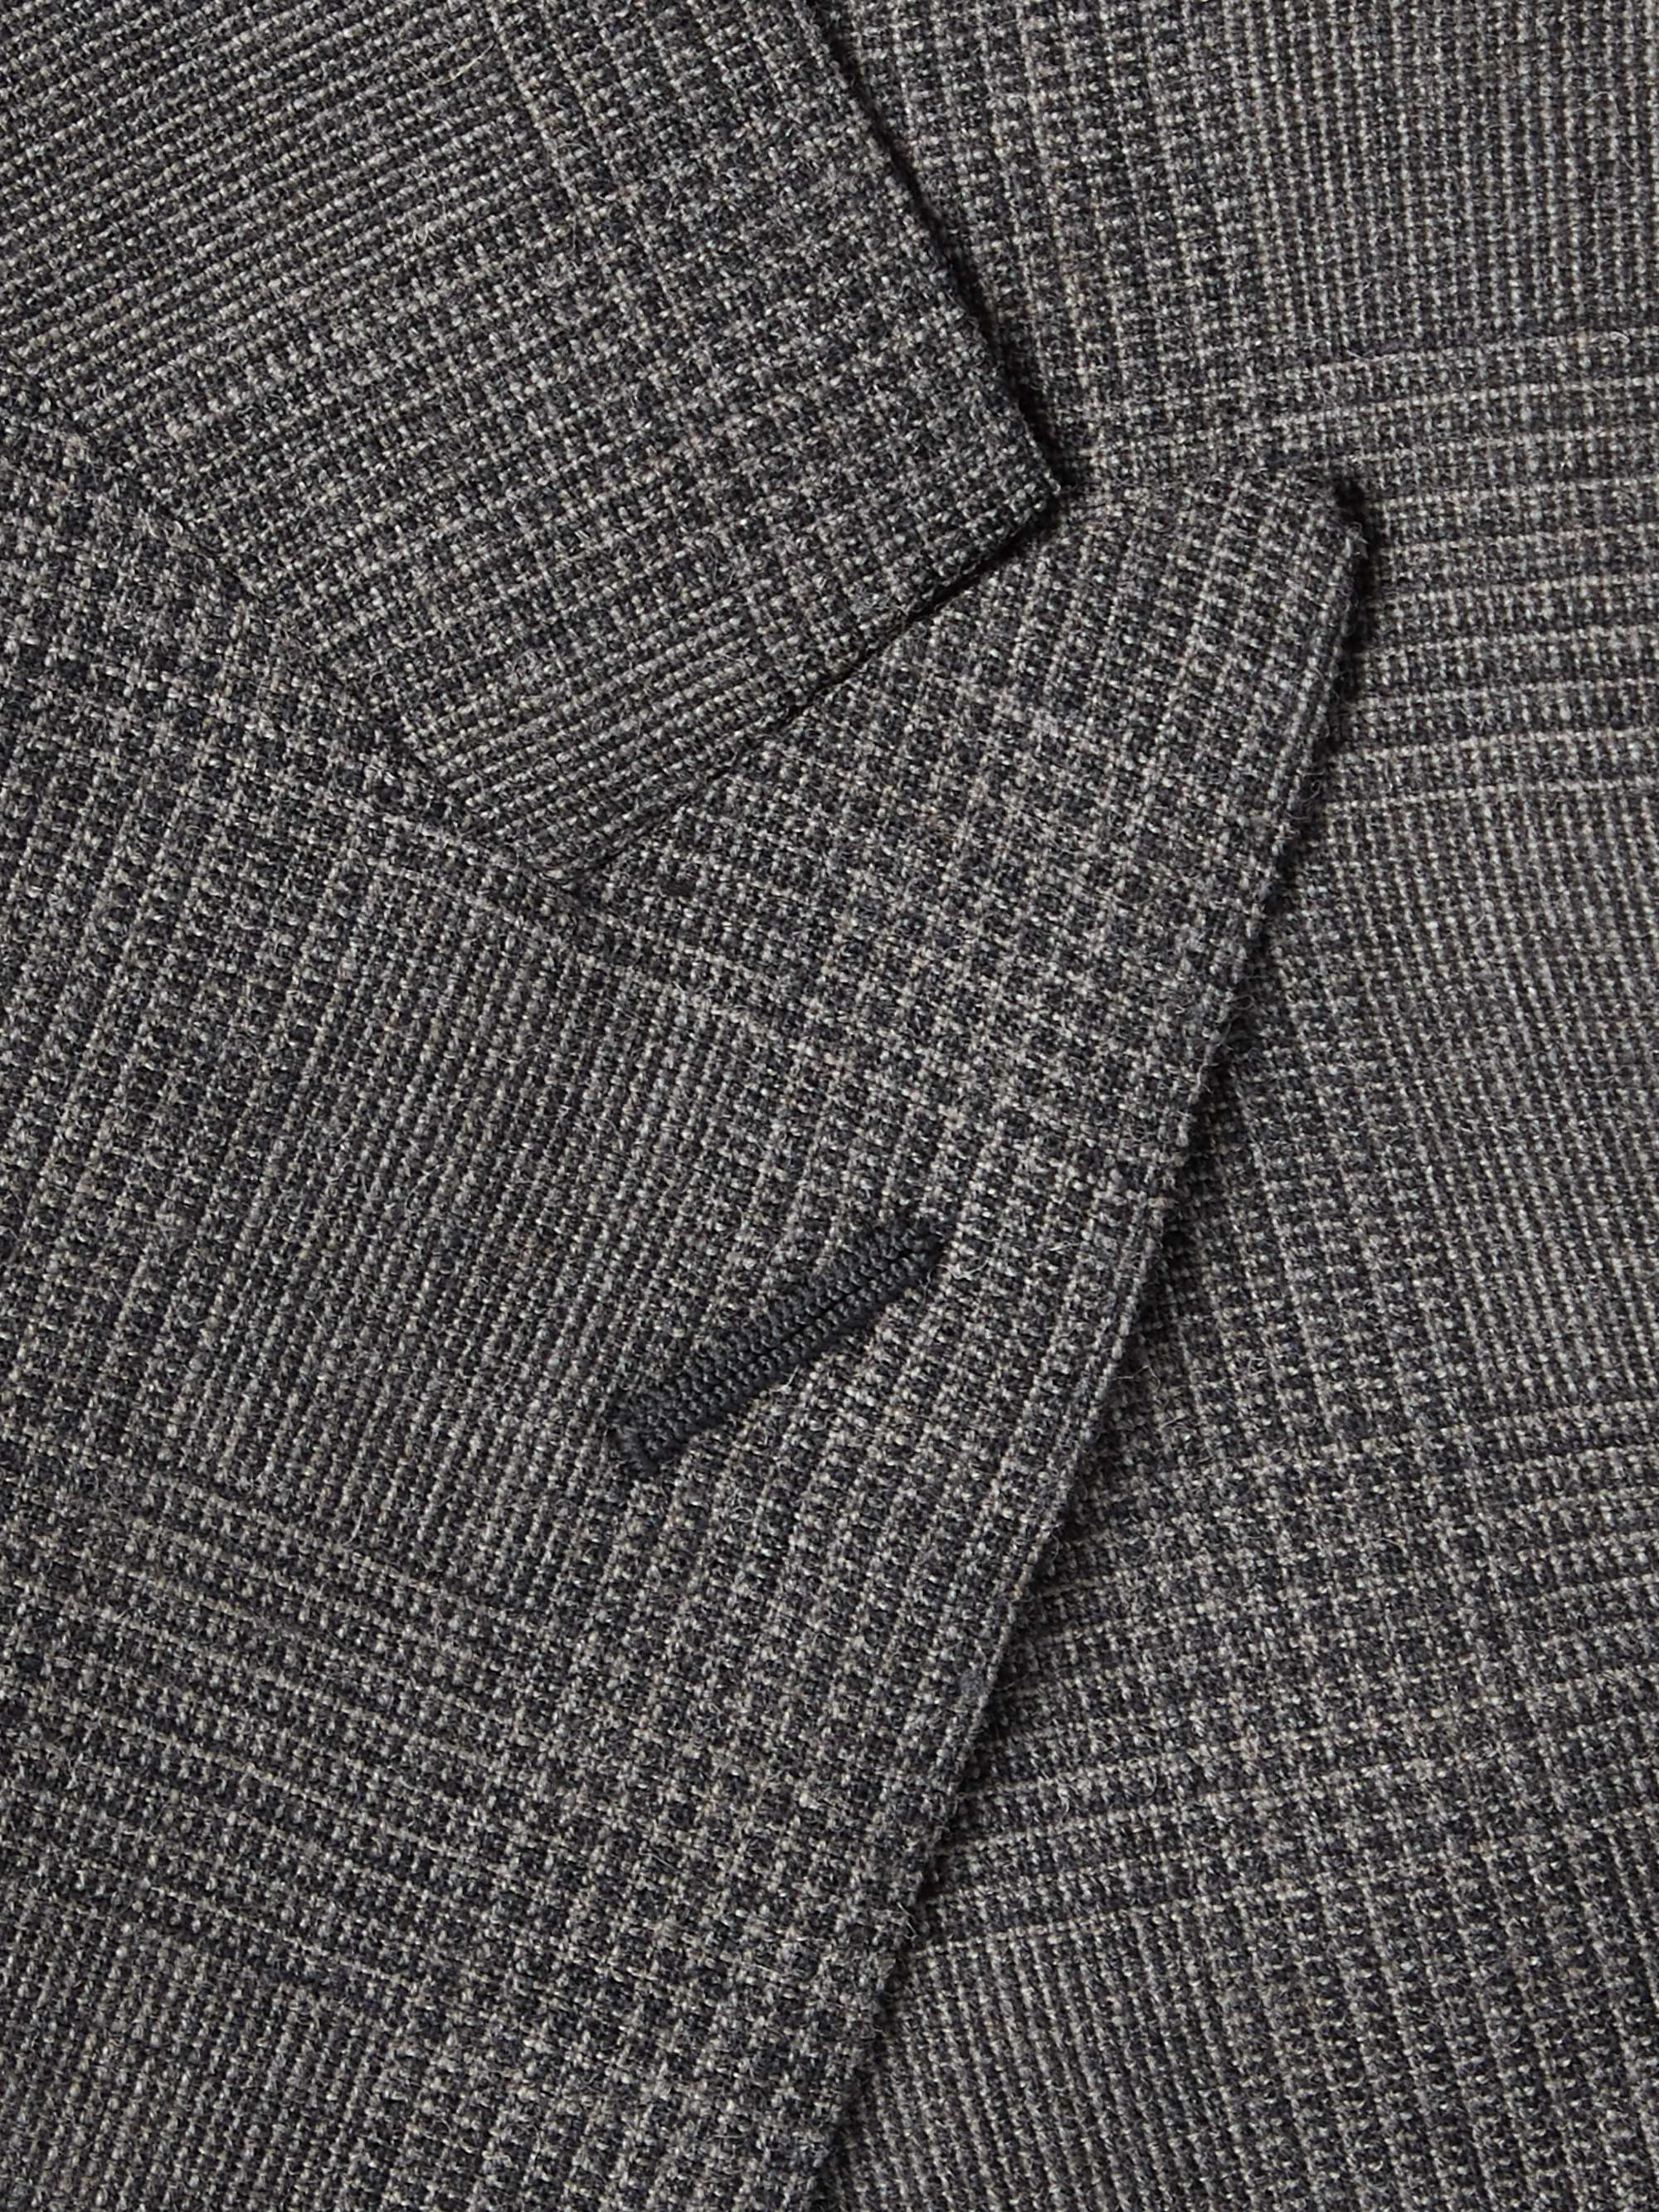 KINGSMAN Archie Reid Slim-Fit Double-Breasted Prince of Wales Checked Wool Suit Jacket